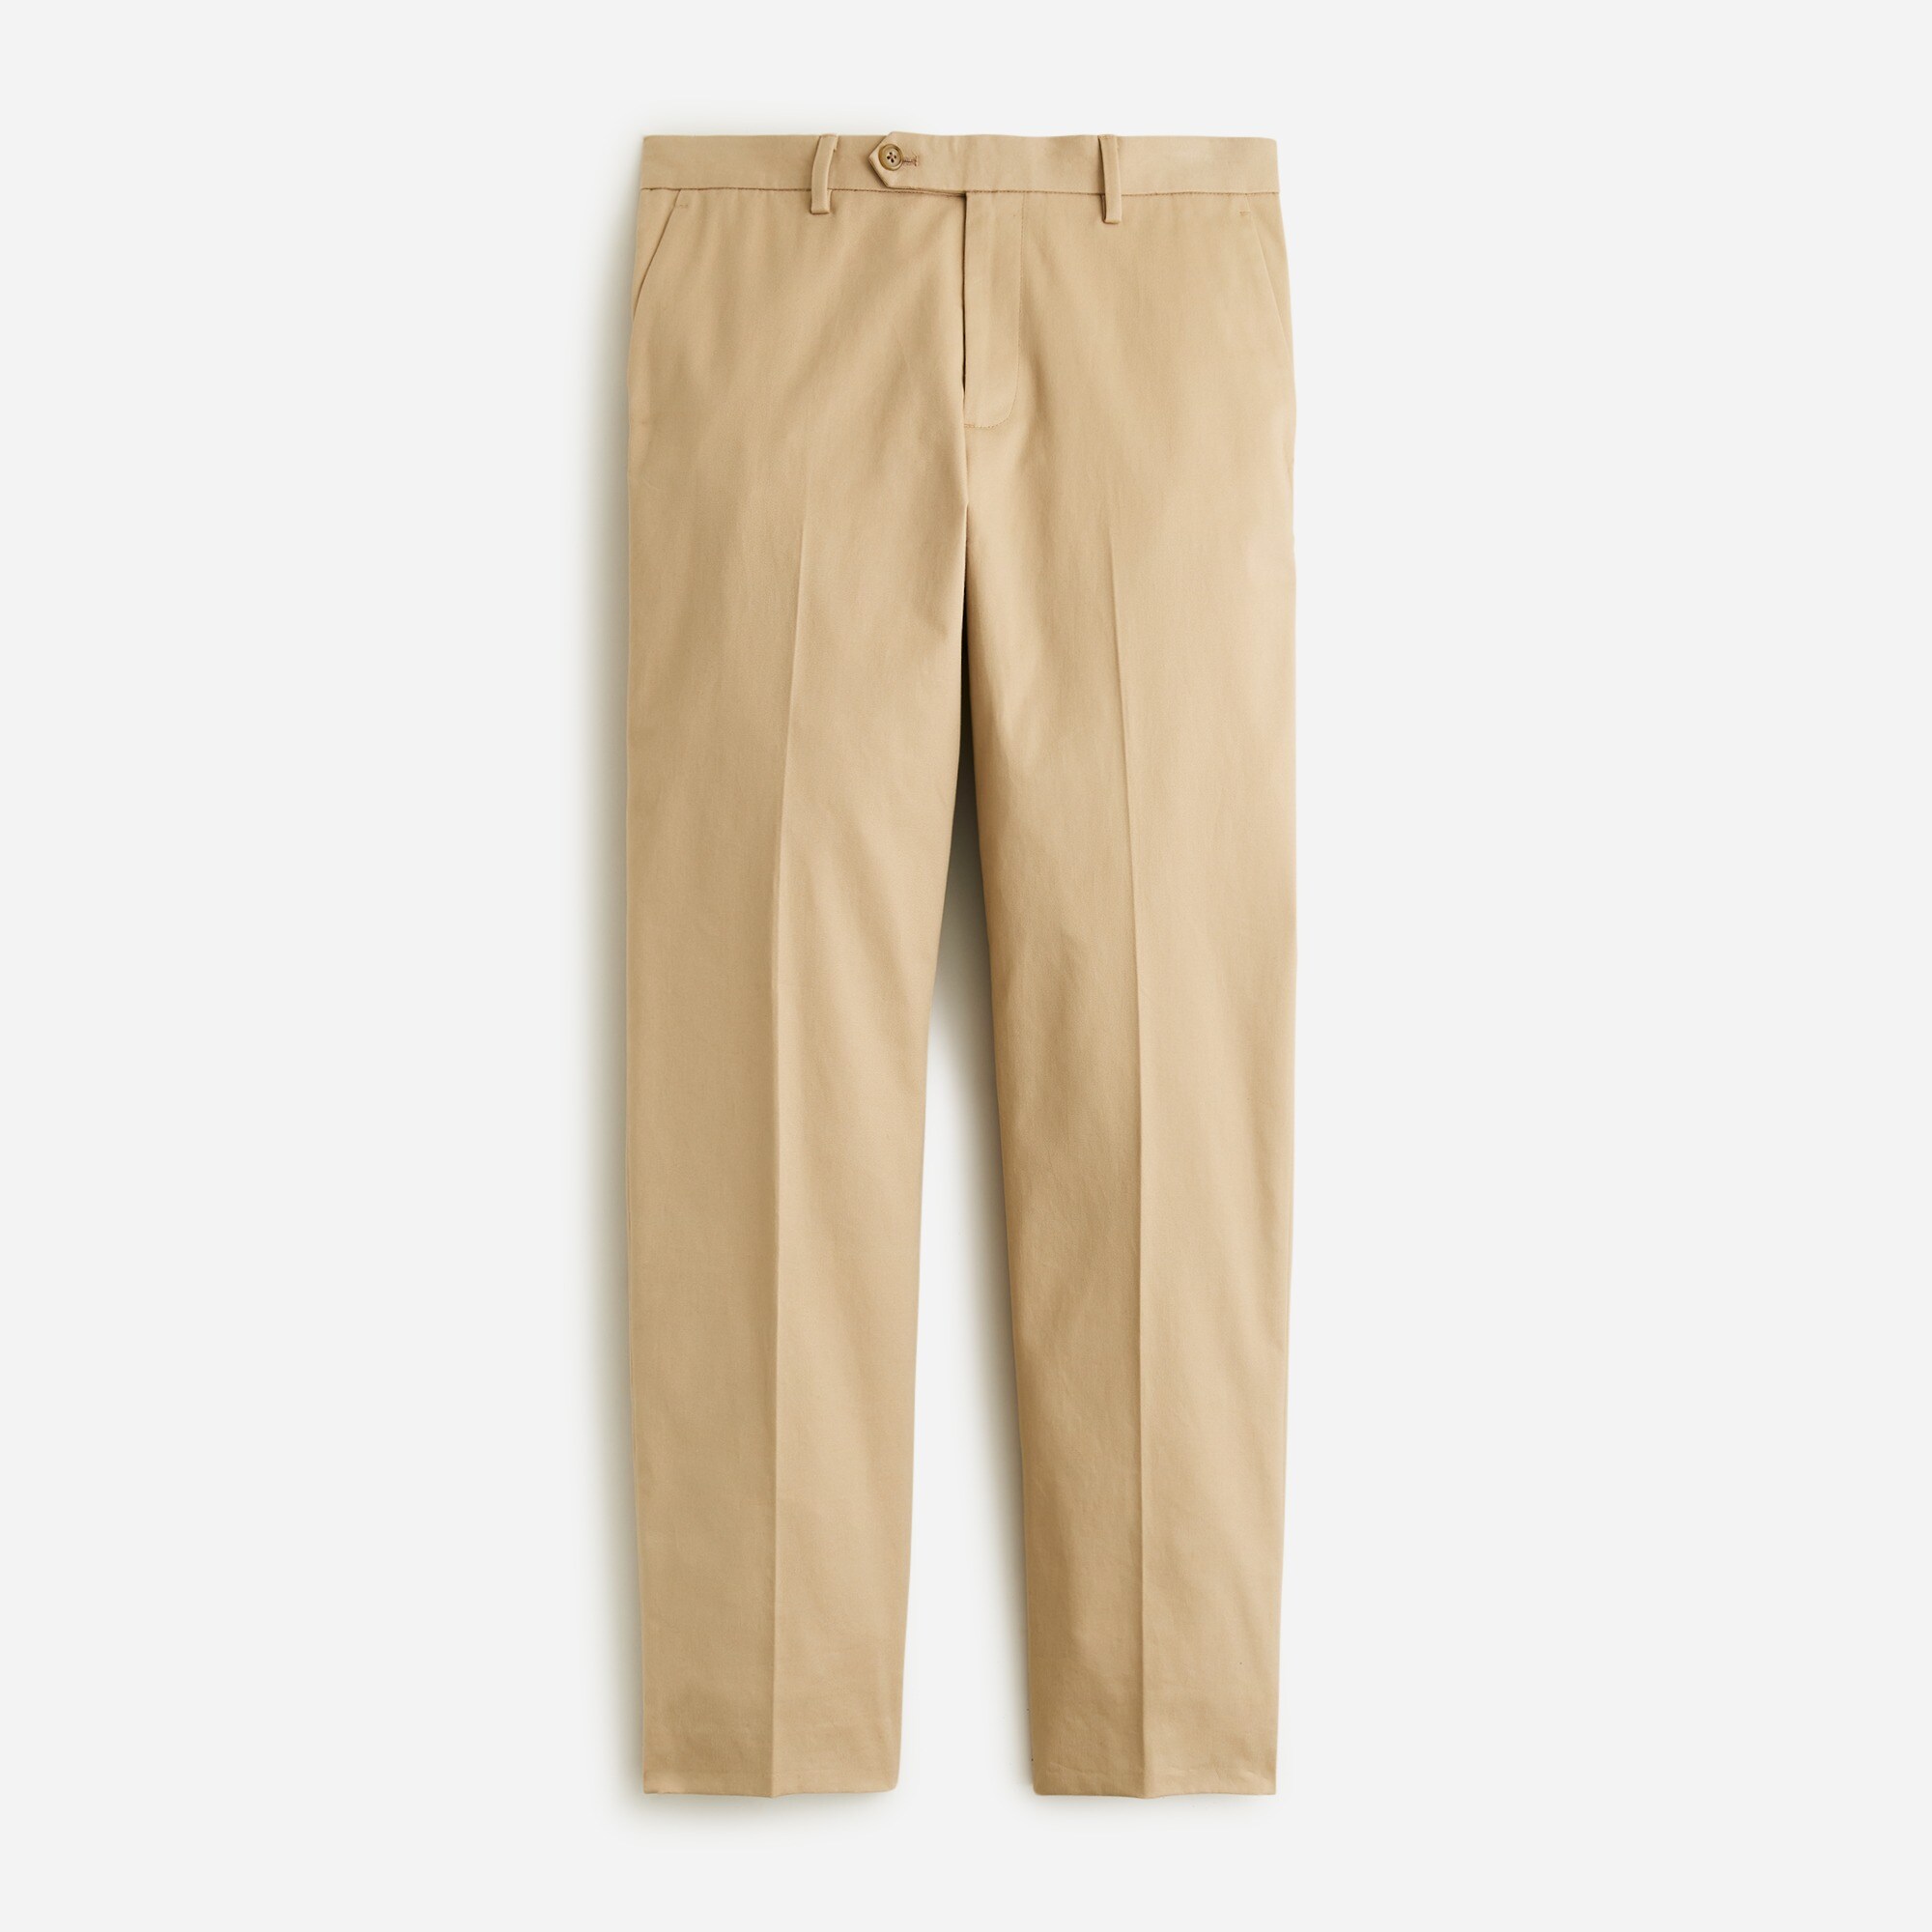  Bowery dress pant in stretch chino